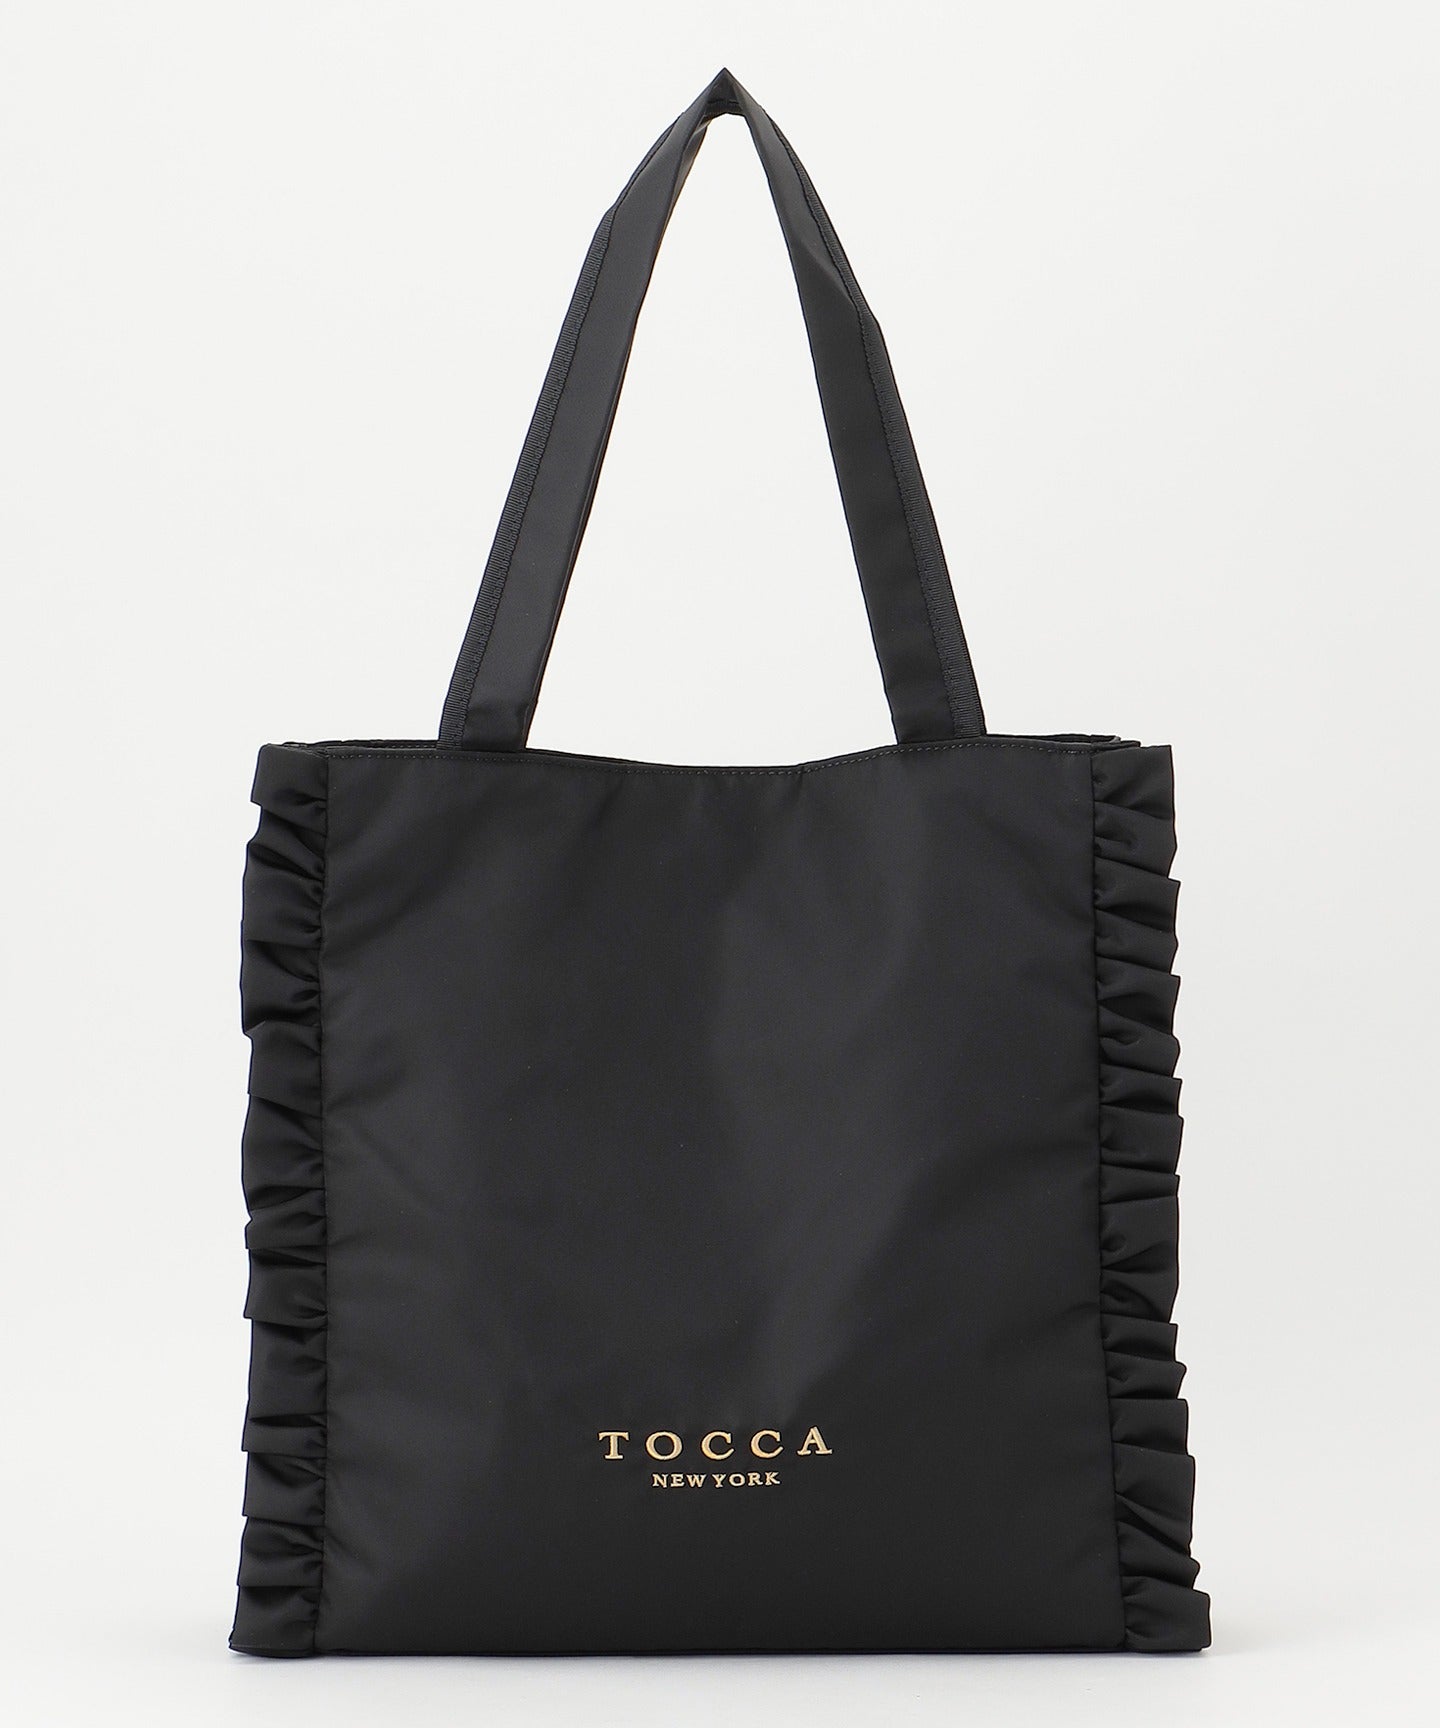 TOCCA トートバッグ